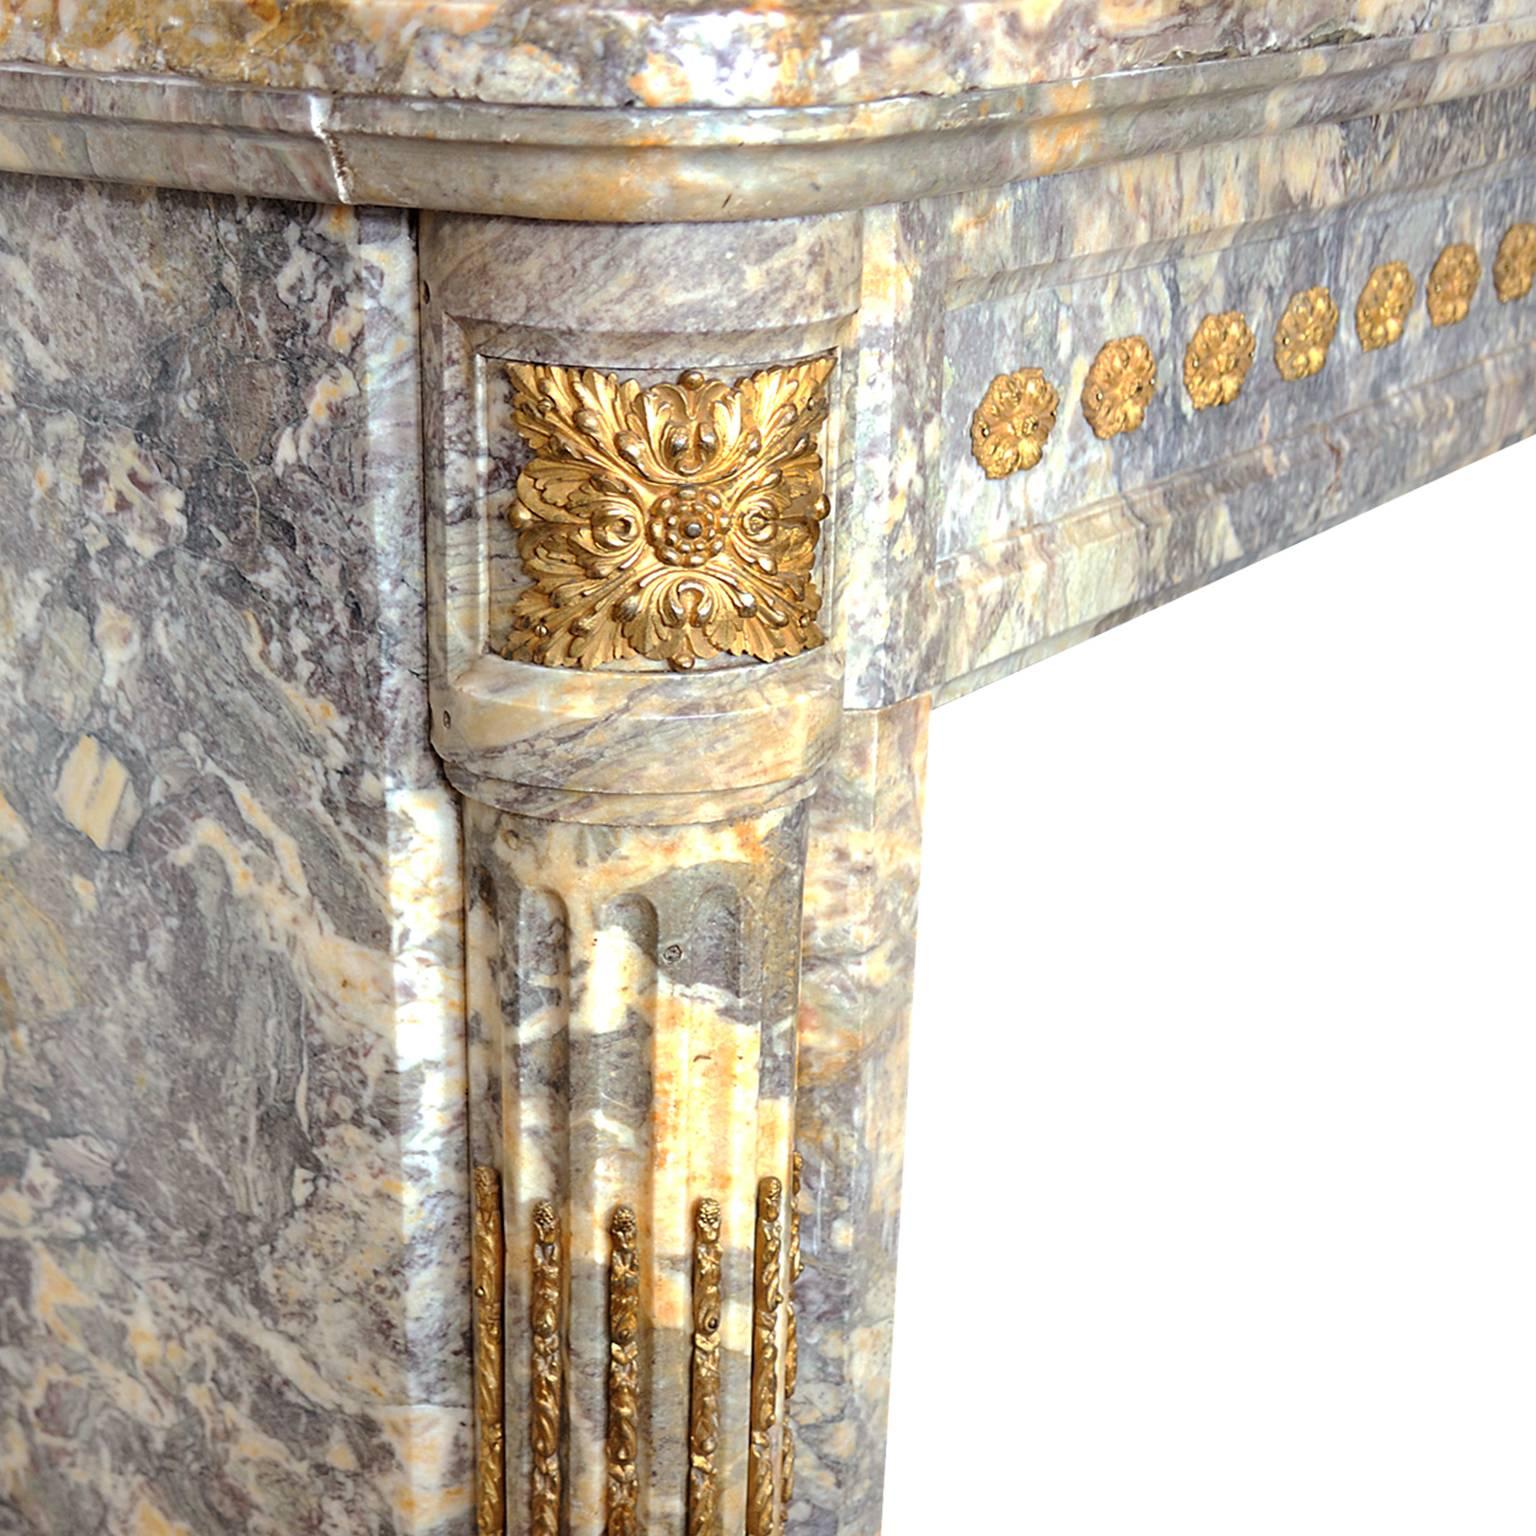 This is an absolutely stunning large French Louis XVI neoclassical fireplace. Made in wonderful convent sienna marble with ormolu mounts, a really beautiful fireplace that would grace and enhance any home, circa 1780.

The fireplace was removed